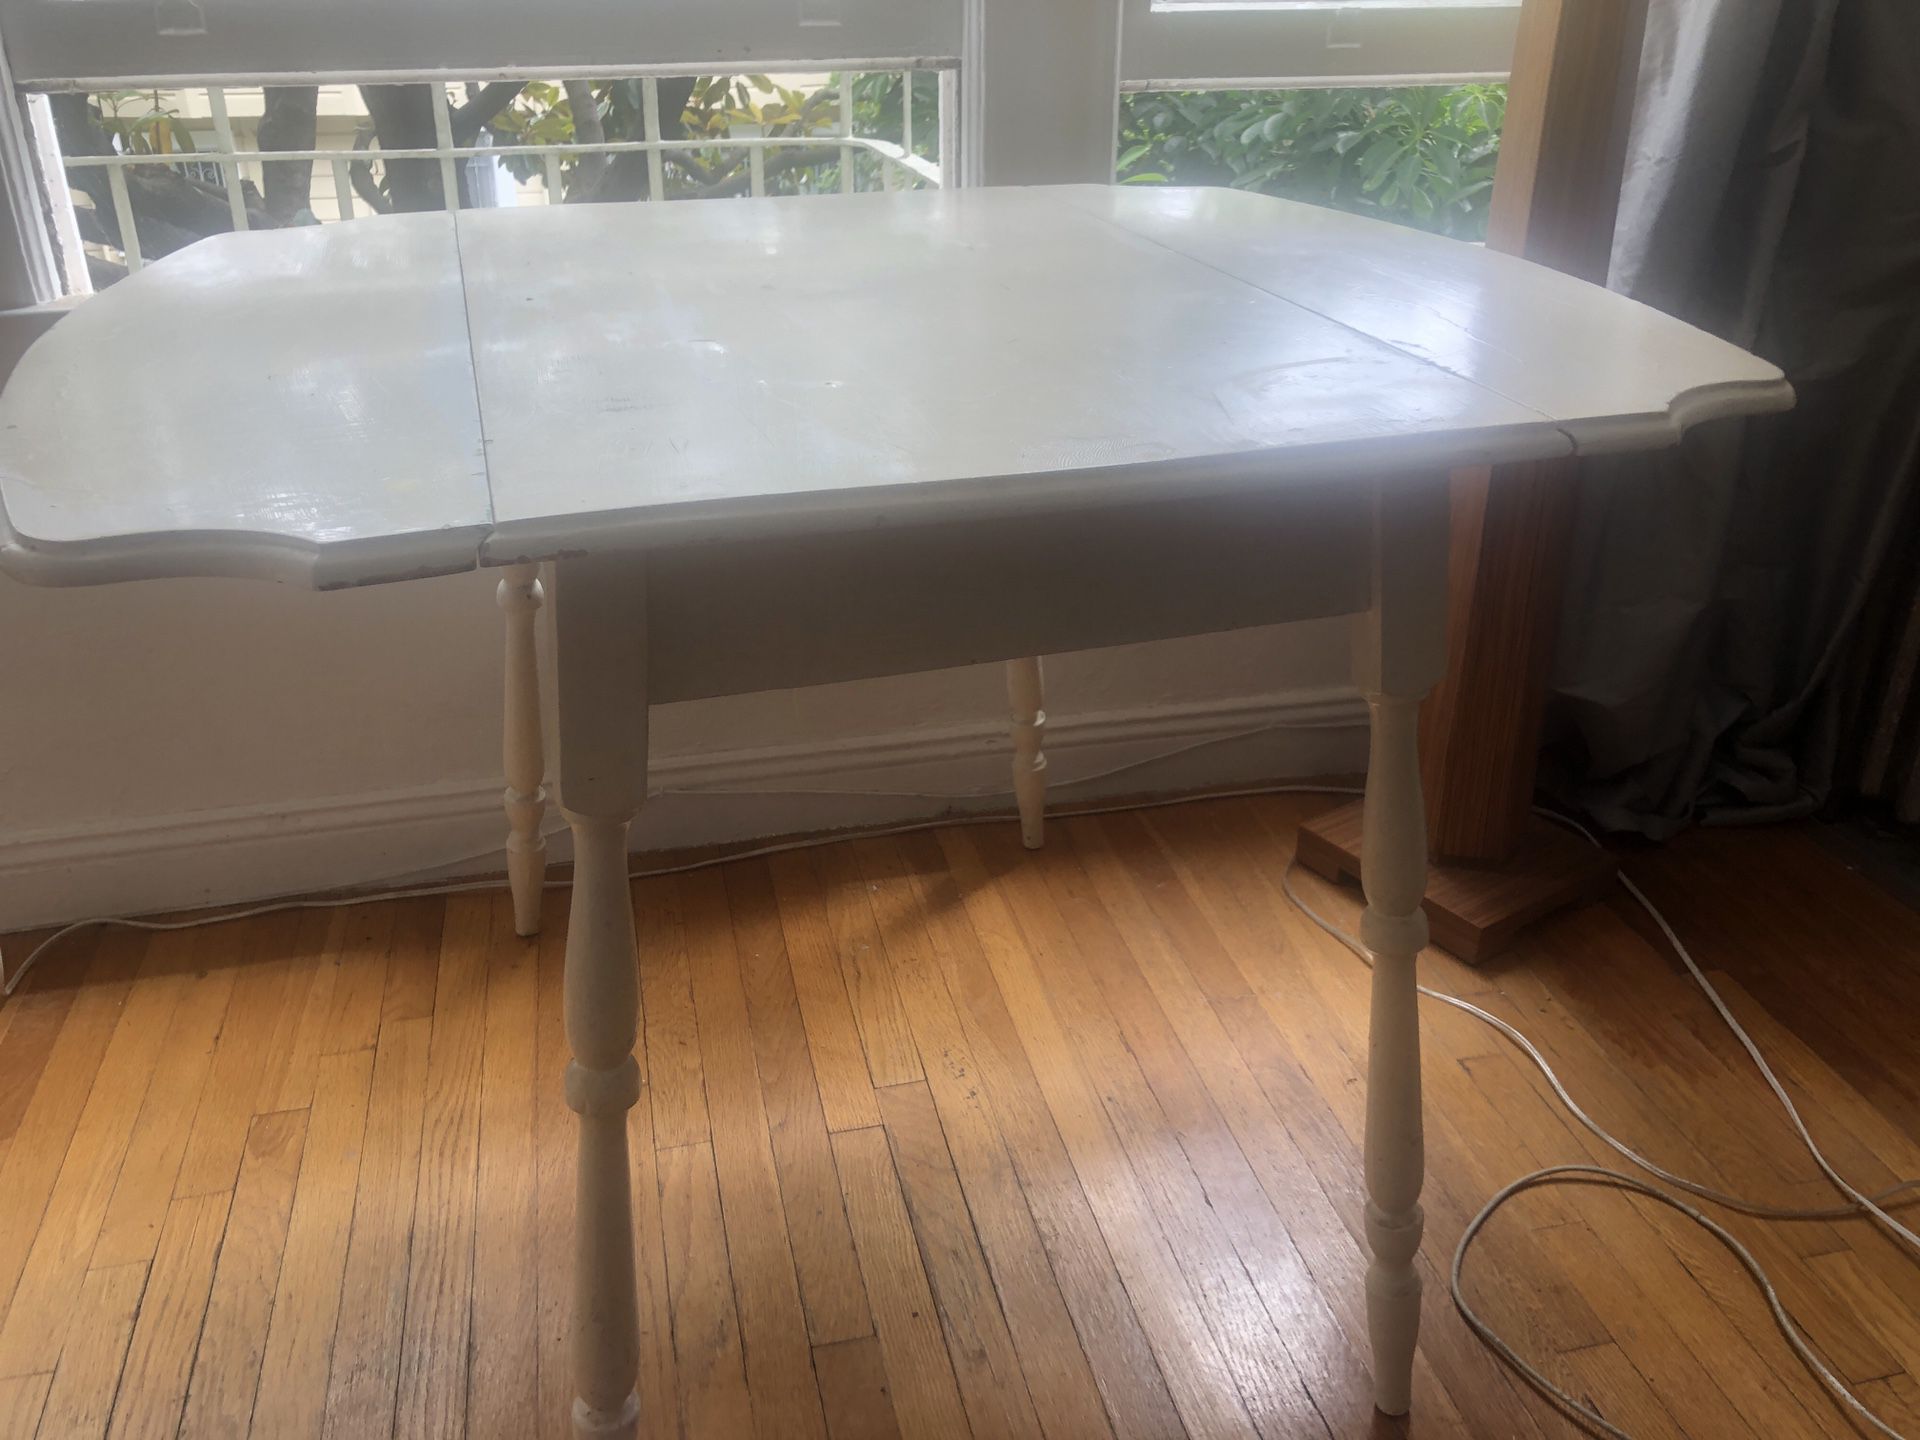 Shabby chic off white kitchen table or end table - foldable